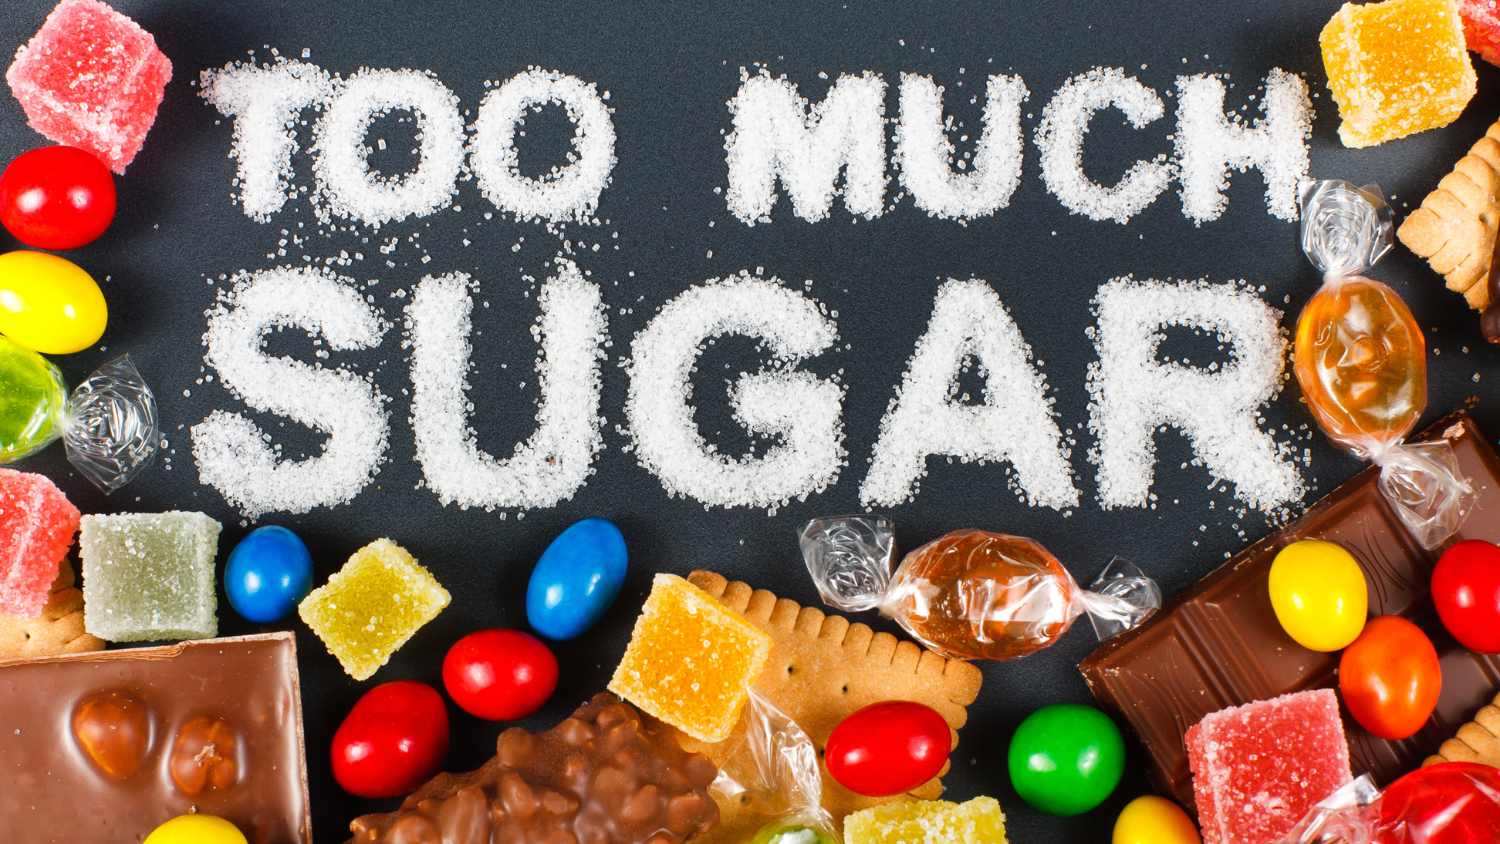 Sugar is often demonized as being bad for our health, but is it really that bad for backpackers? While added sugar certainly has its drawbacks, it can also be a valuable source of energy for backpackers, especially when they are exerting themselves for long periods of time. In this article, we'll take a look at the pros and cons of added sugar for backpackers, and see if it's really as bad as it's made out to be. #addedsugar #besthikingsnacks #bestbackpackingfood #backcountryfoodie